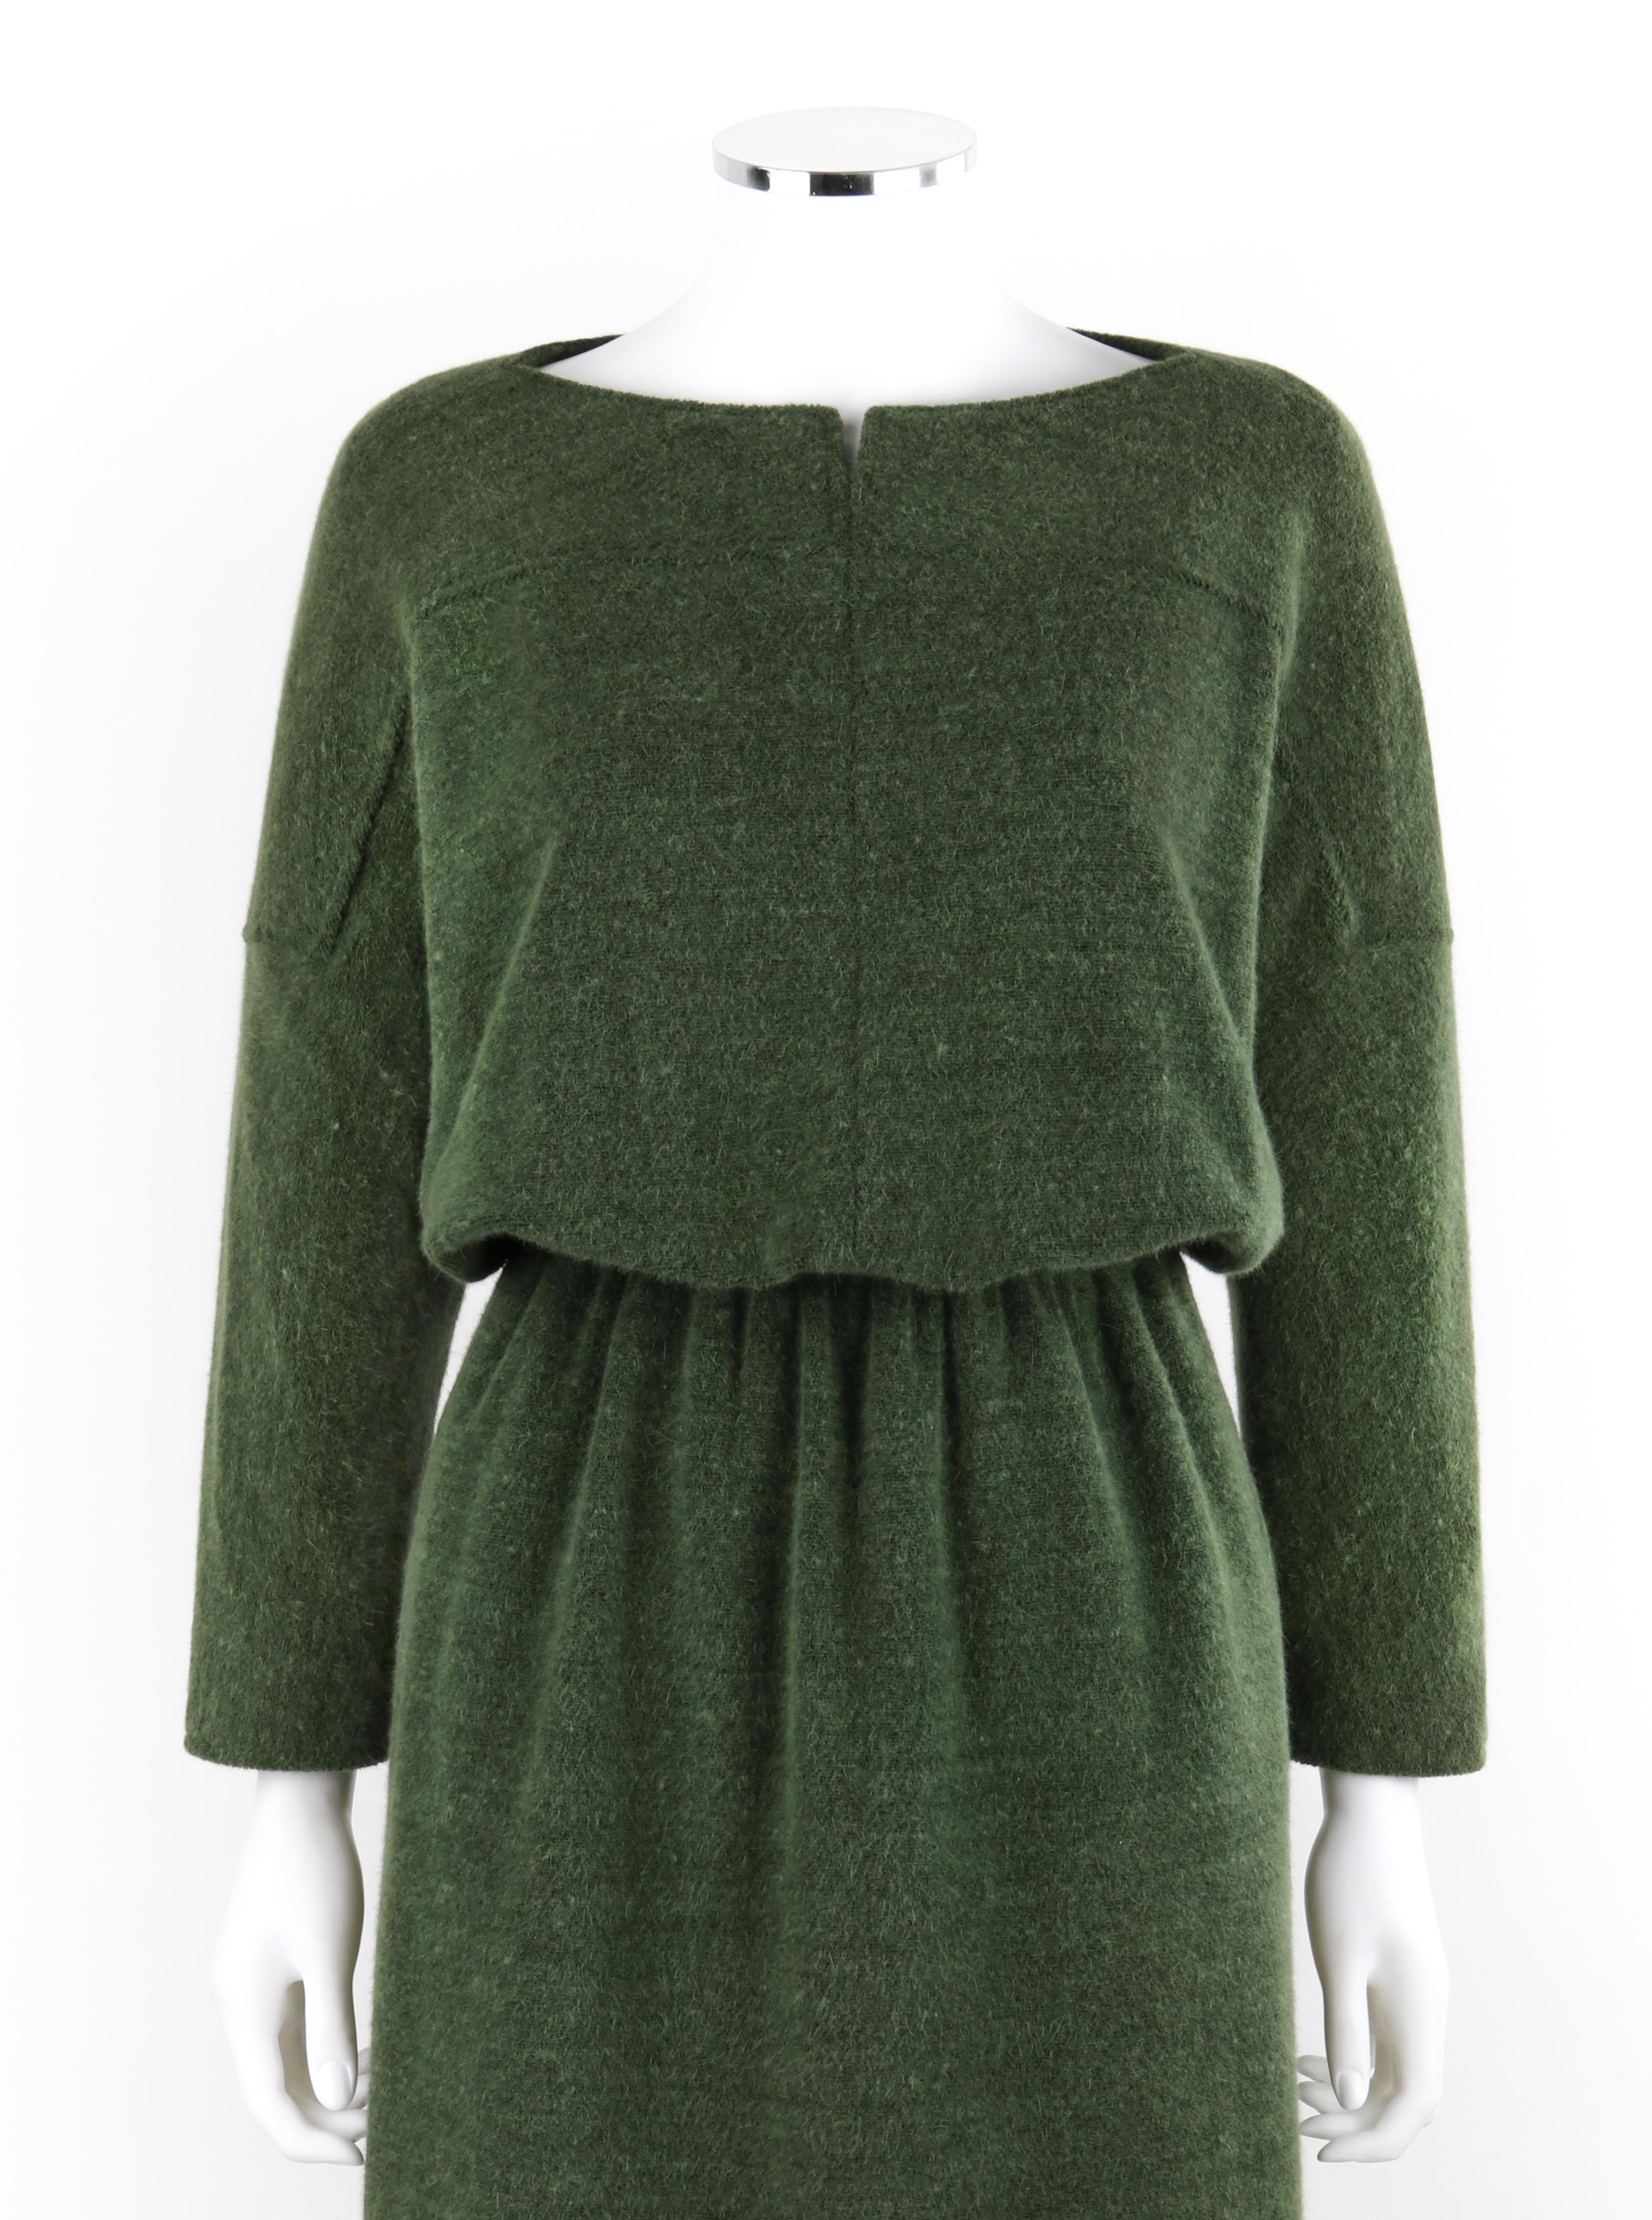 COURREGES c.1980’s Forest Green Knit Long Sleeve Cinched Waist Midi Tunic Dress
Circa: 1980’s
Label(s): Courreges Paris
Designer: Andre Courreges
Style: Midi knit tunic dress
Color(s): Forest green
Lined: Yes
Marked Fabric Content: “42% Wool, 41%